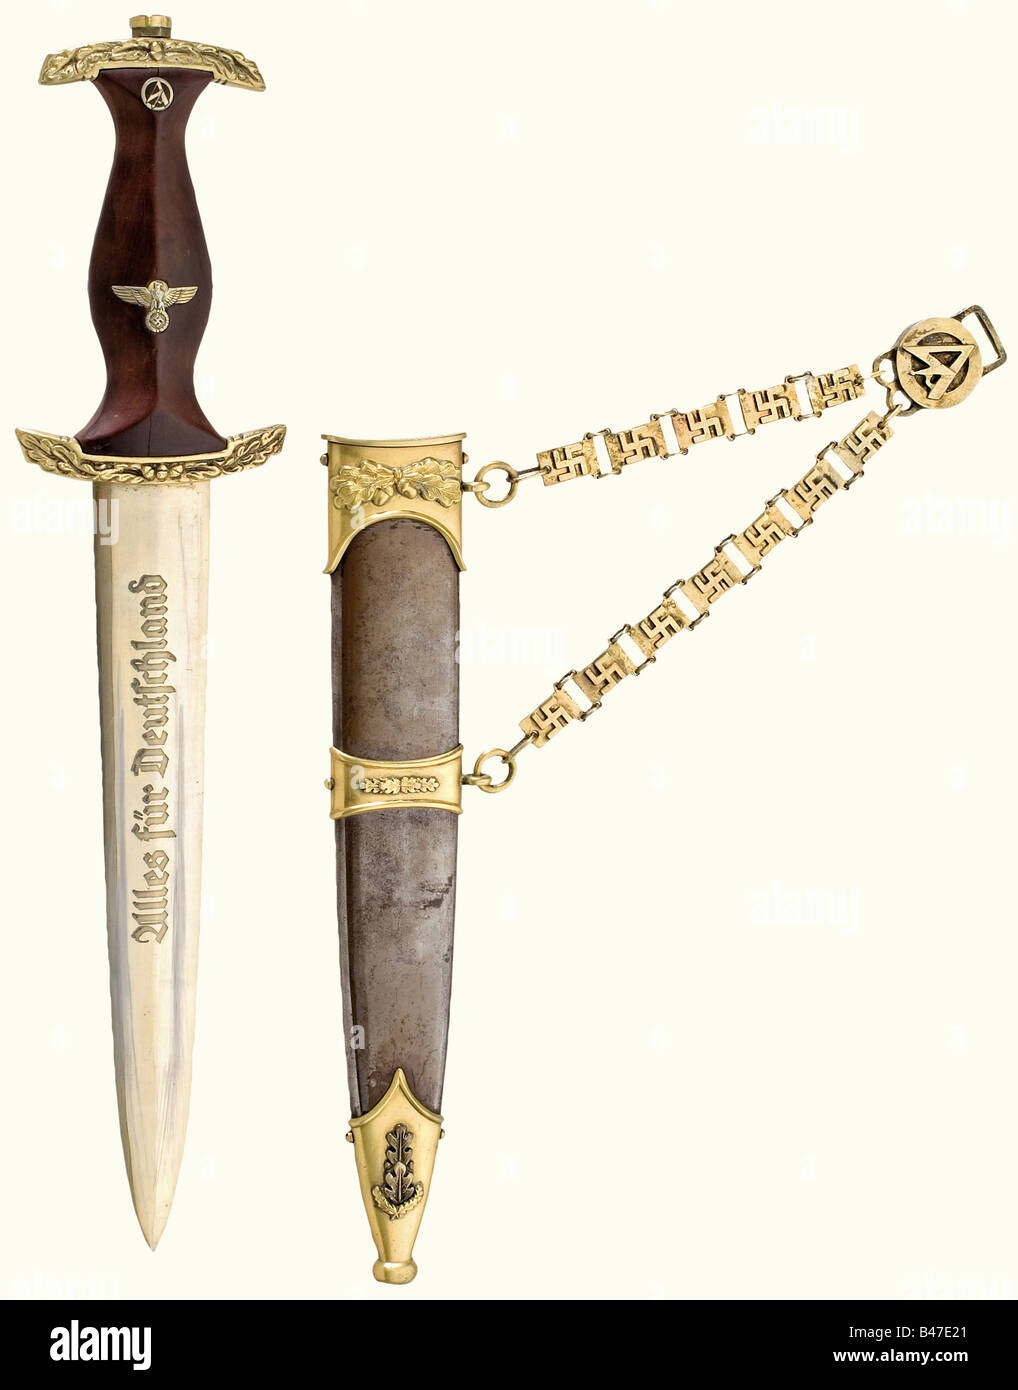 An honour dagger for the Naval SA., Blade etched with the motto and 'In treuer Kameradschaft - Viktor Lutze' (In loyal Camaraderie - Viktor Lutze) as well as the manufacturer inscription 'Clemens Jung Solingen'. Quillons with oak leaf decoration. Brown wooden grip (cracked). Browned scabbard, mountings decorated with oak leaves. Chain suspension. Blade and fittings gilded. Length ca. 35 cm.The breakup of an edged weapons collectionThe pieces offered in this section of the auction were acquired since the post-war years from private possession or directly from th, Stock Photo